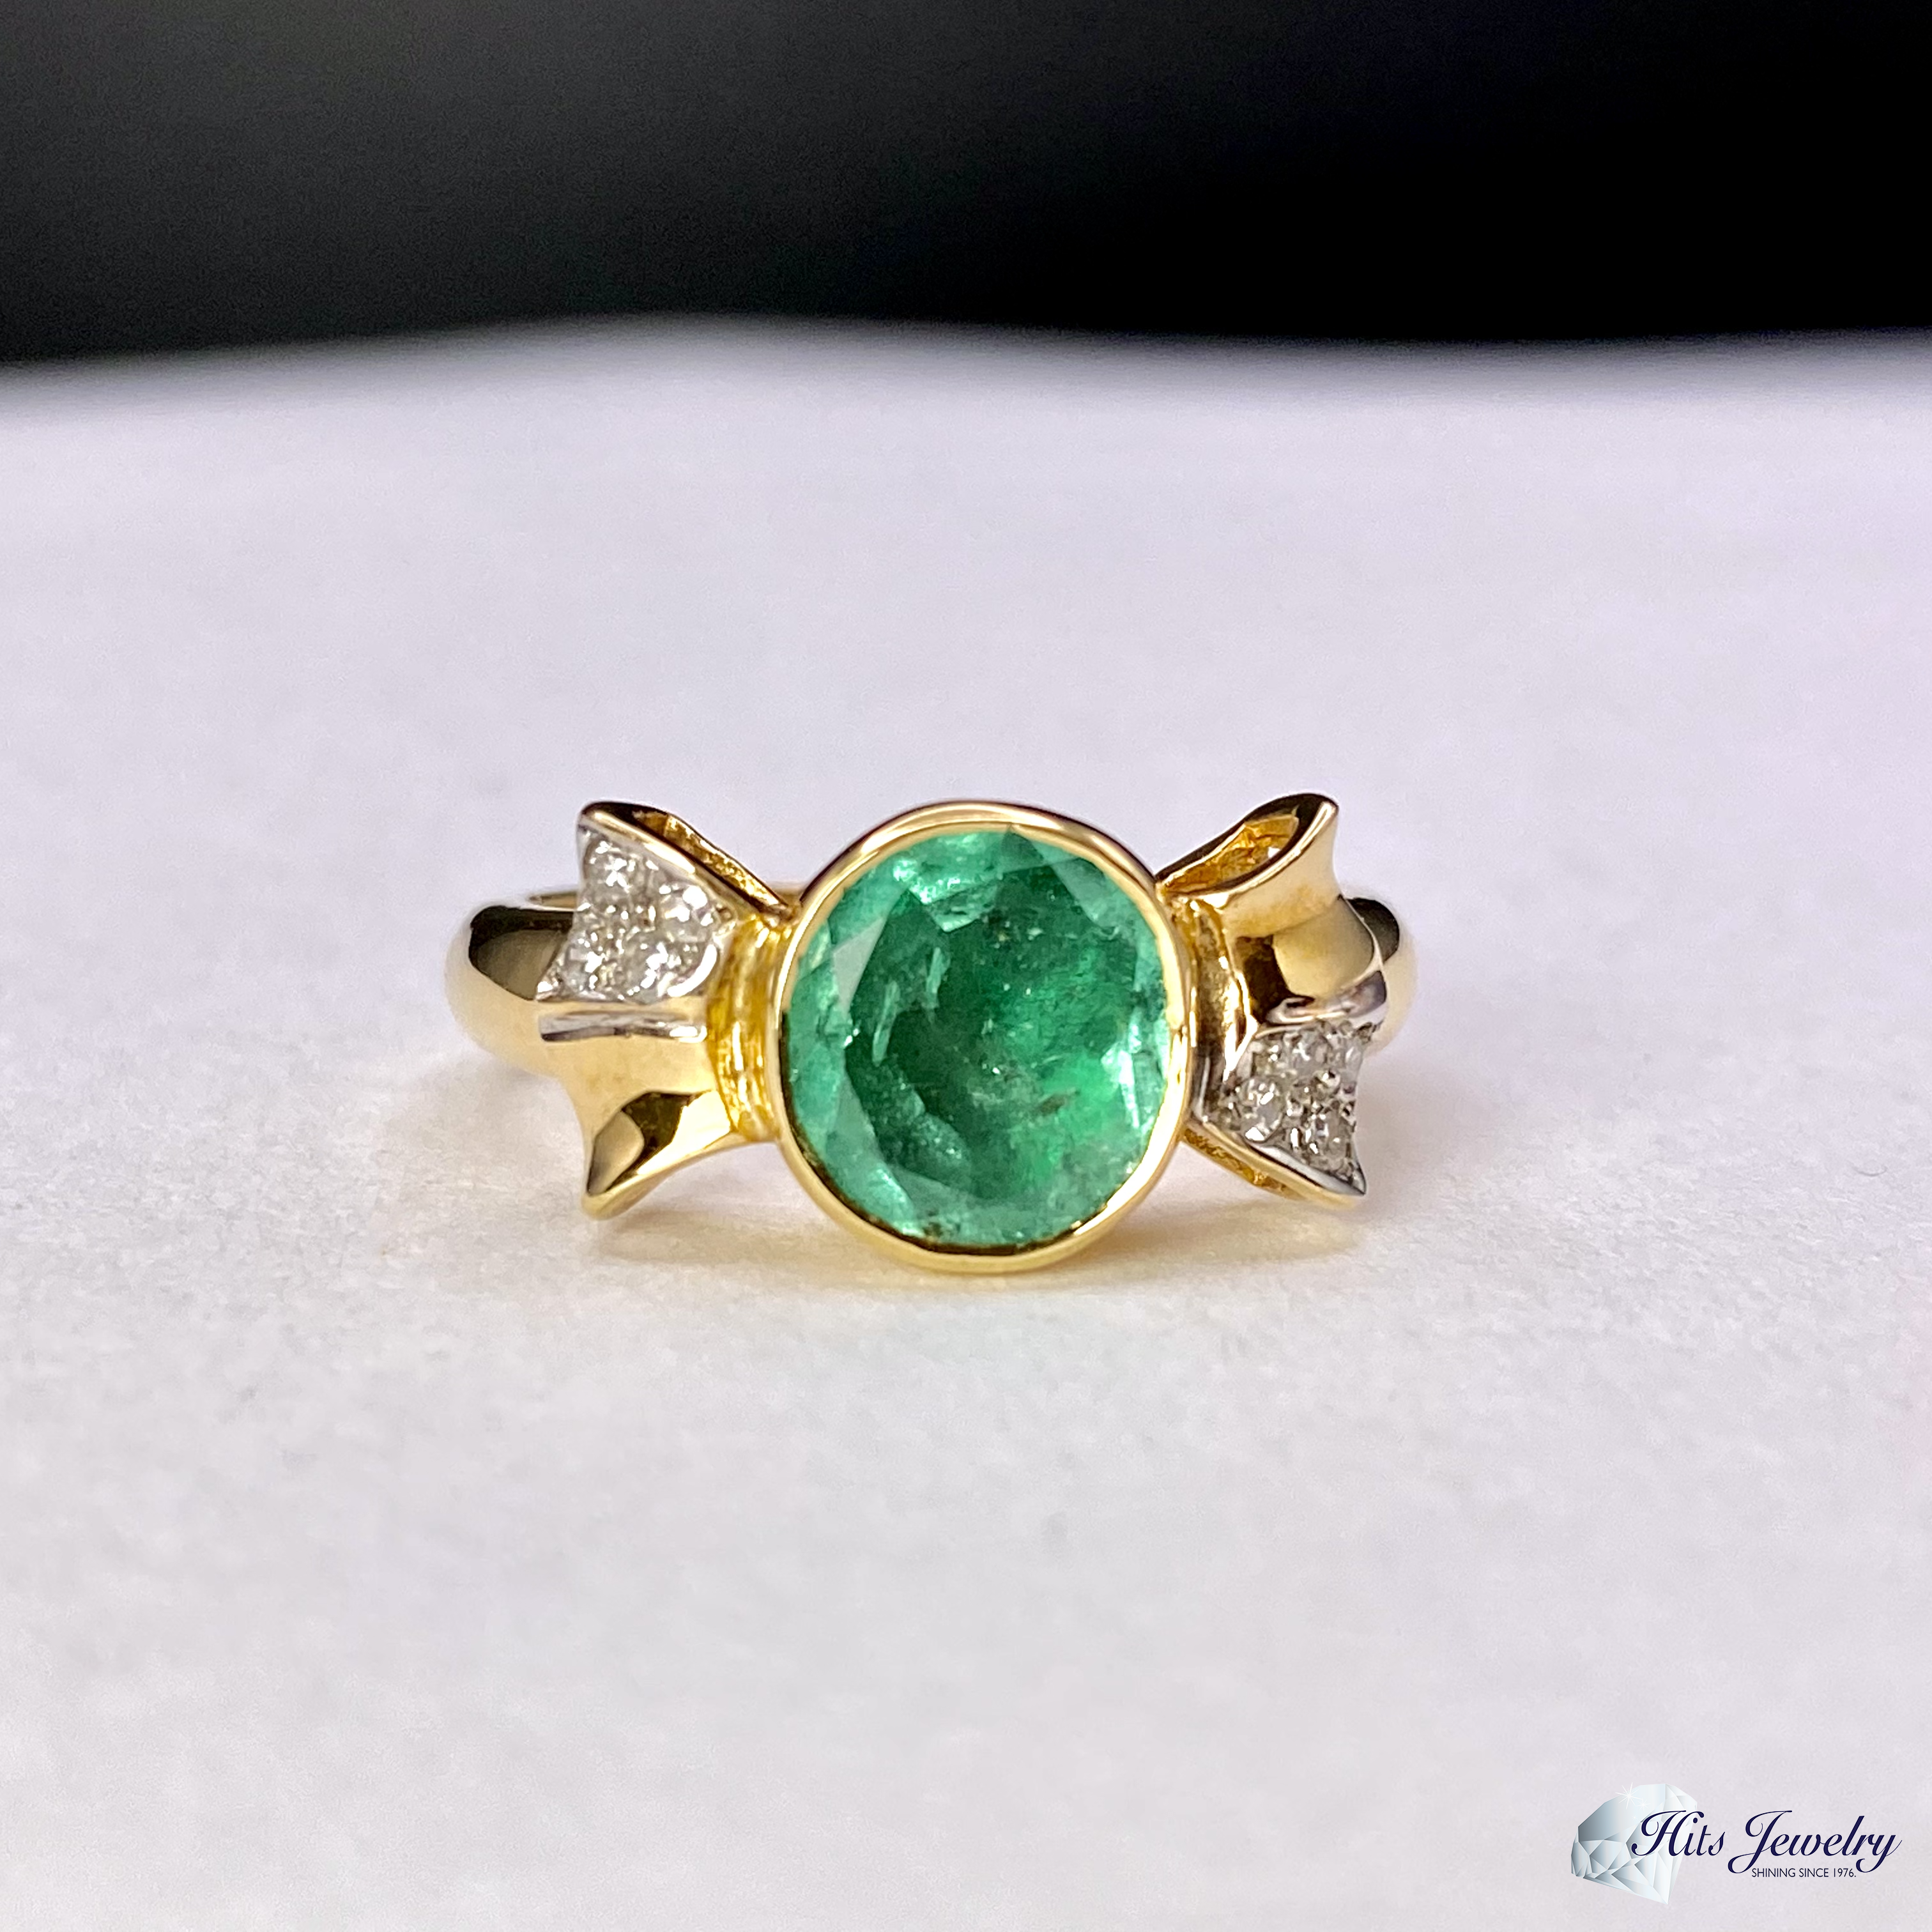 Emerald and Sapphire Cocktail Ring | The Perfect Setting, Inc